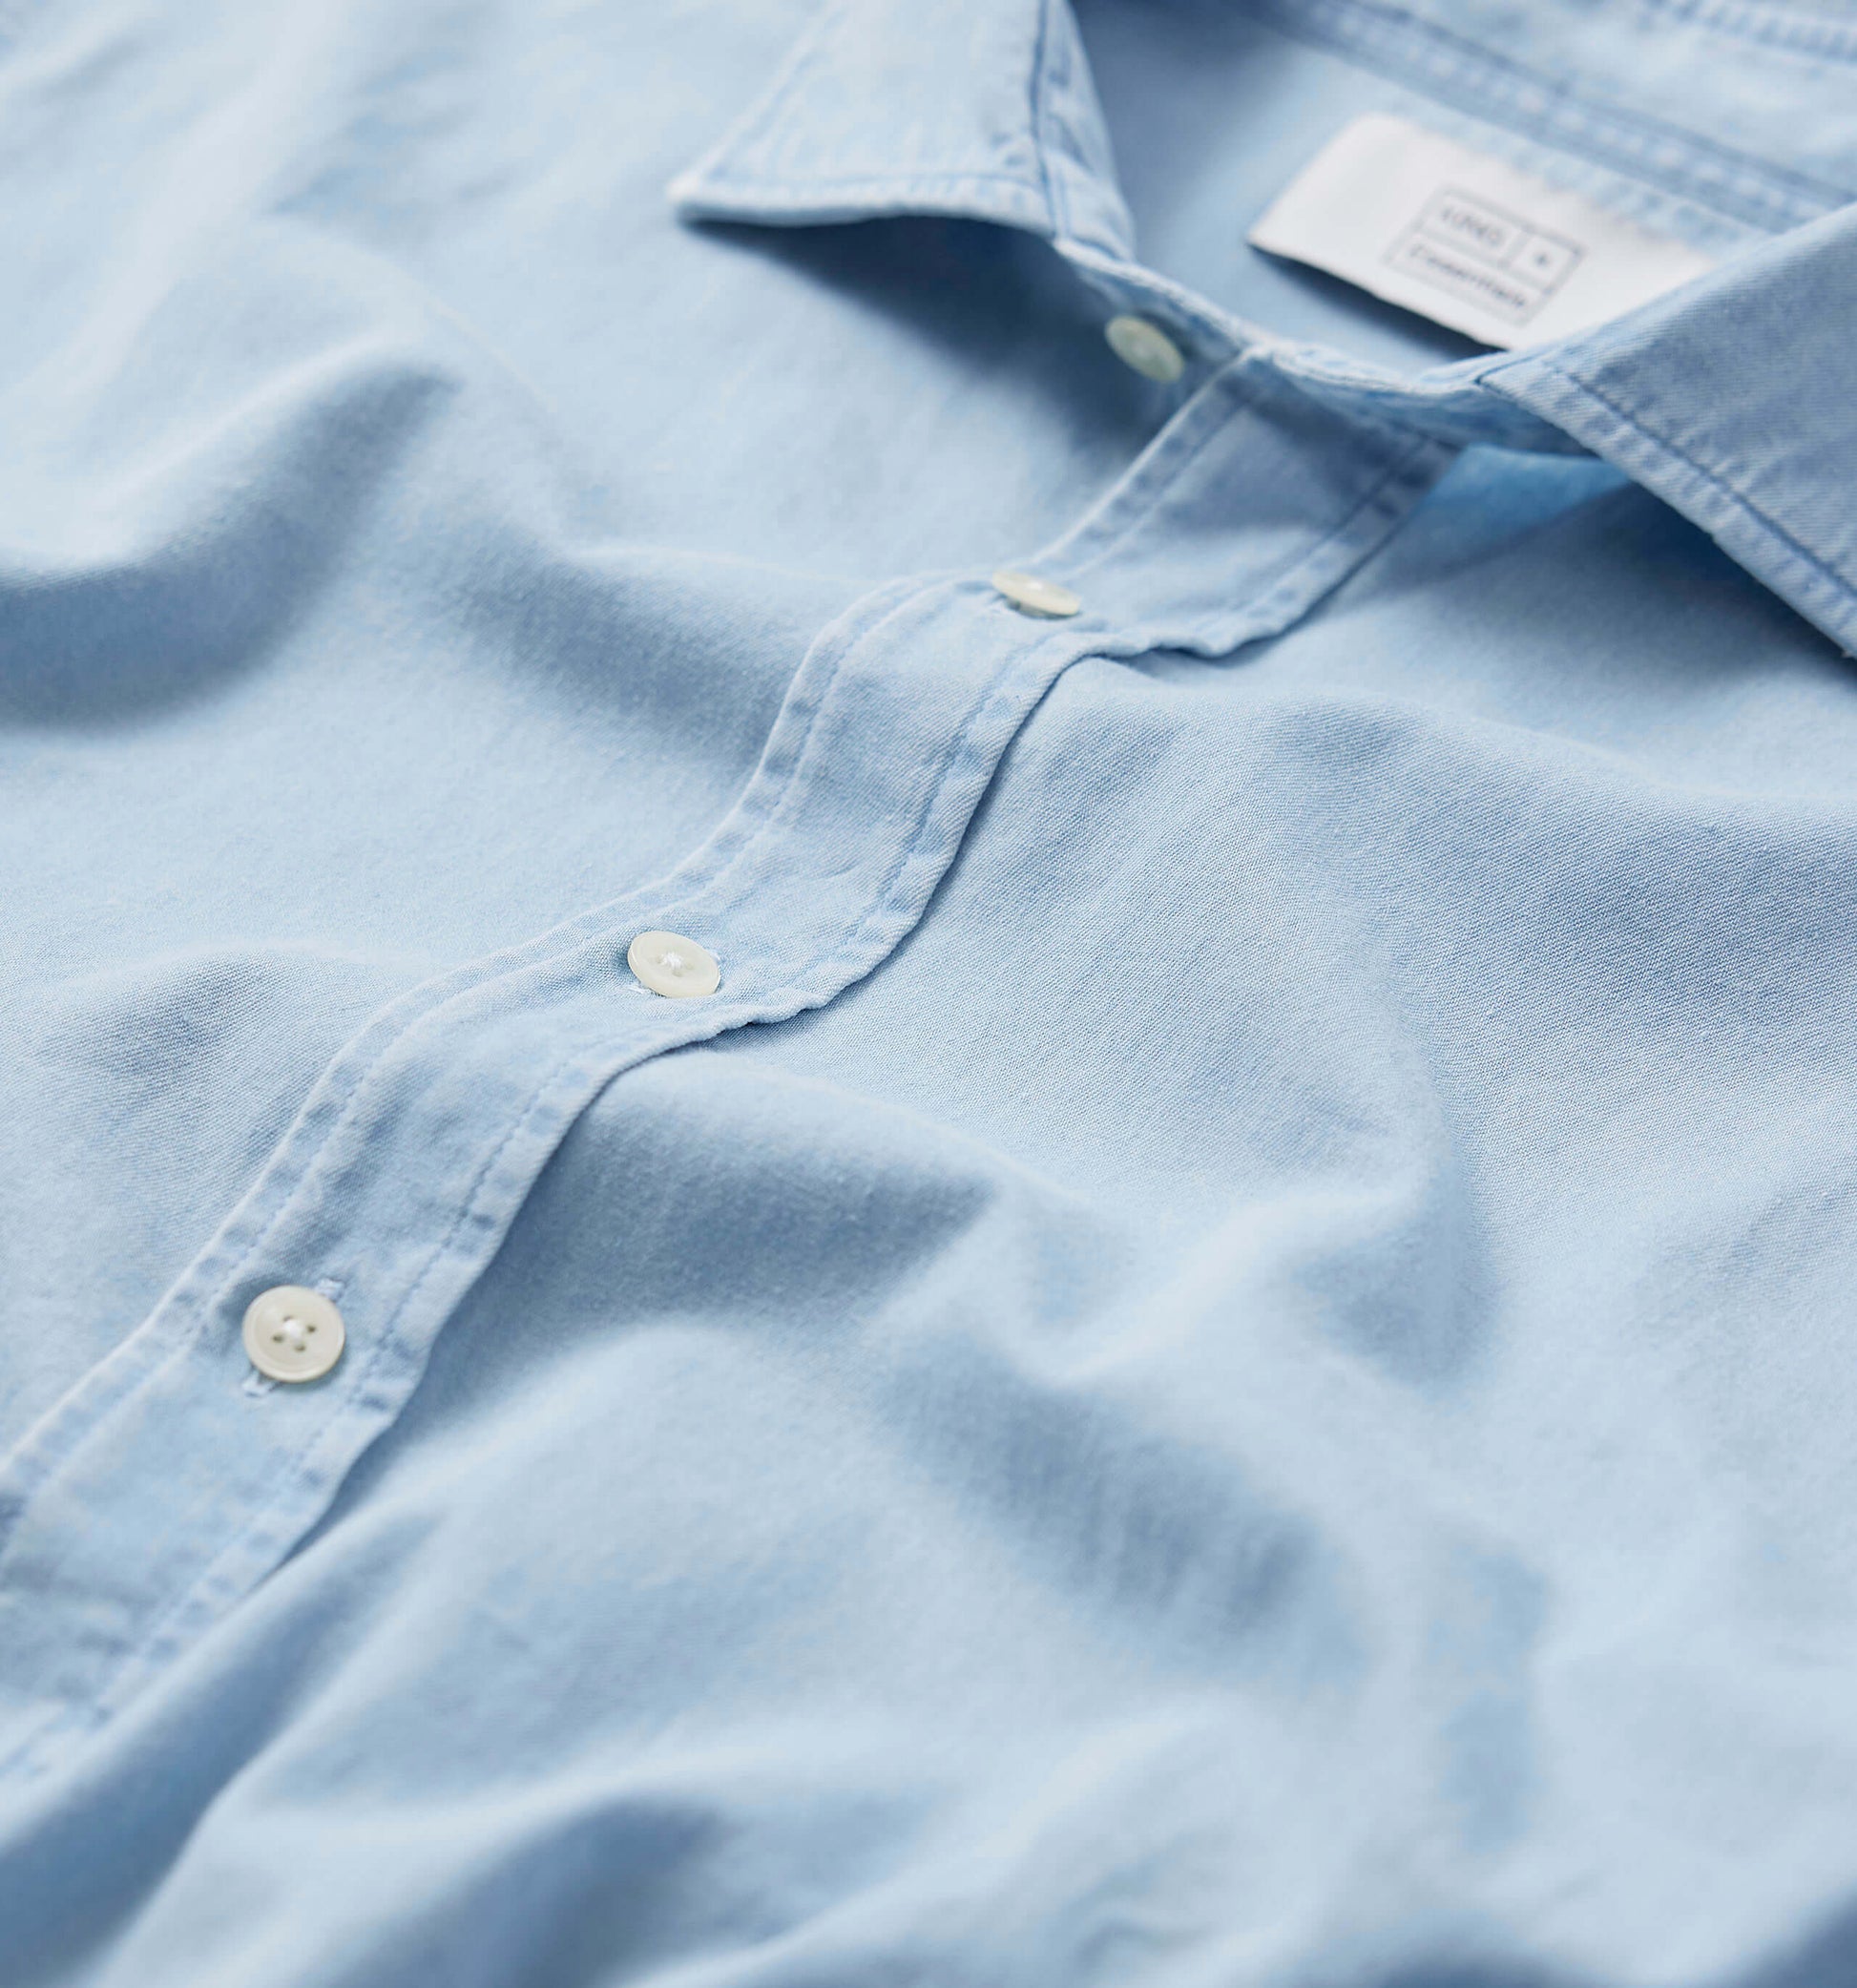 The William - Widespread Denim Shirt In Light Chambray From King Essentials